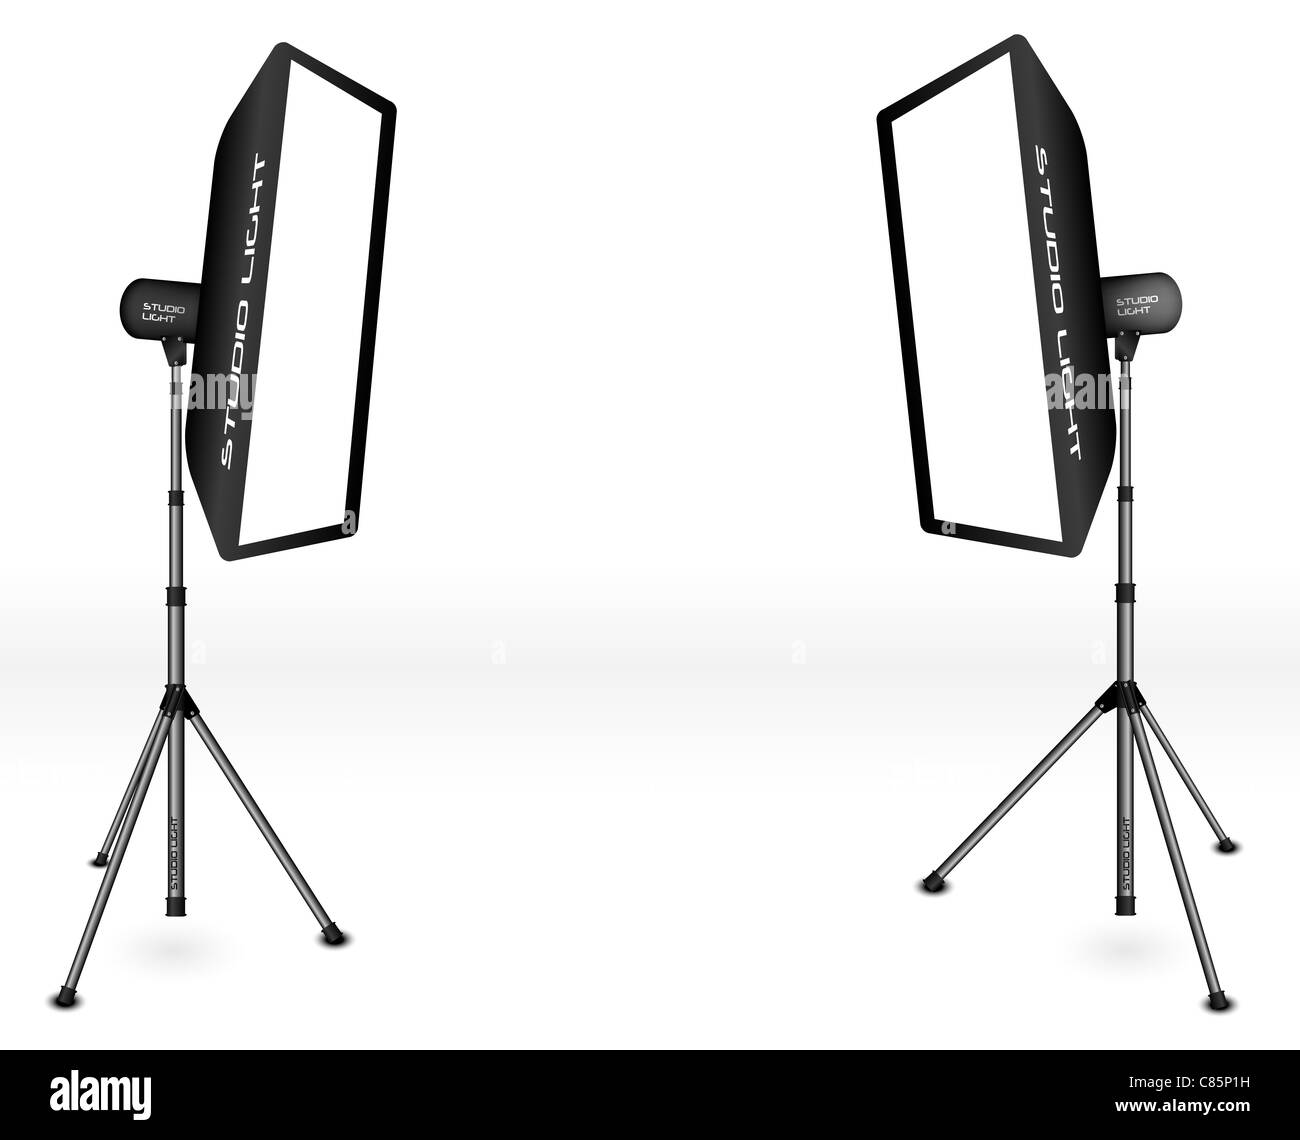 Photographic LIghting - Two Professional Studio Lights with Soft Boxes on Tripods on White Background Stock Photo